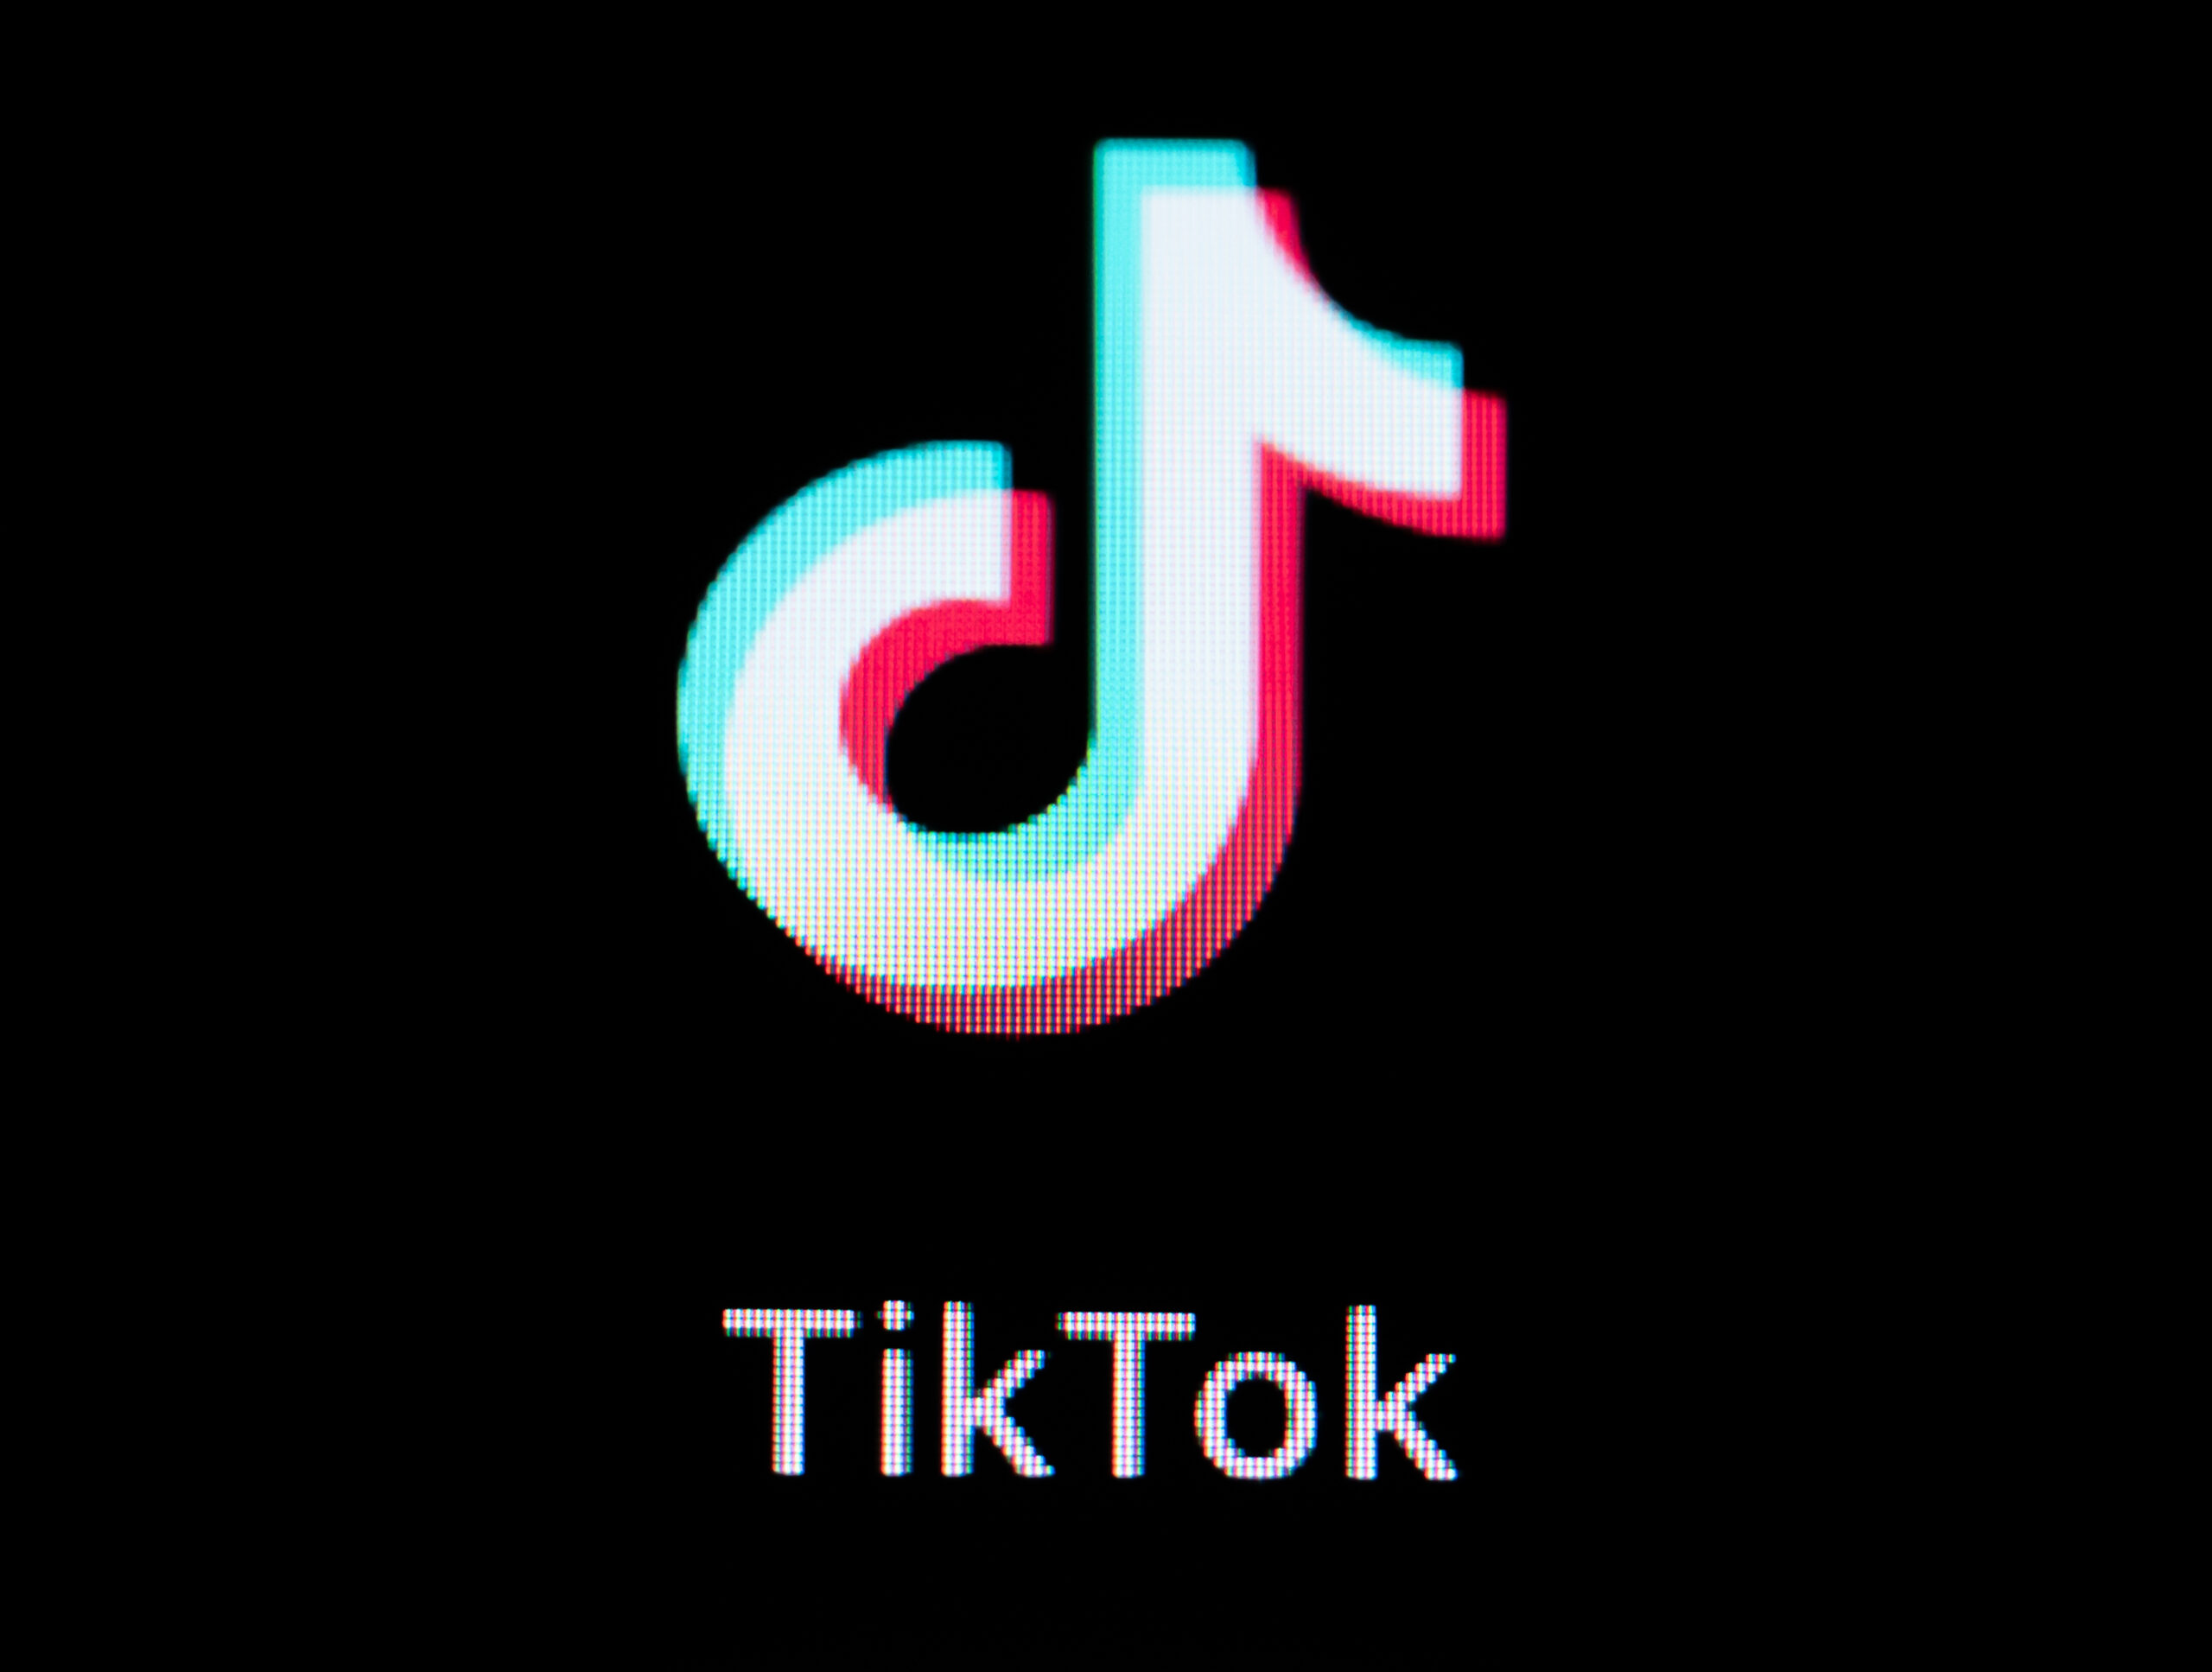 TikTok Surpassed Google To Become The Most Visited Website In 2021